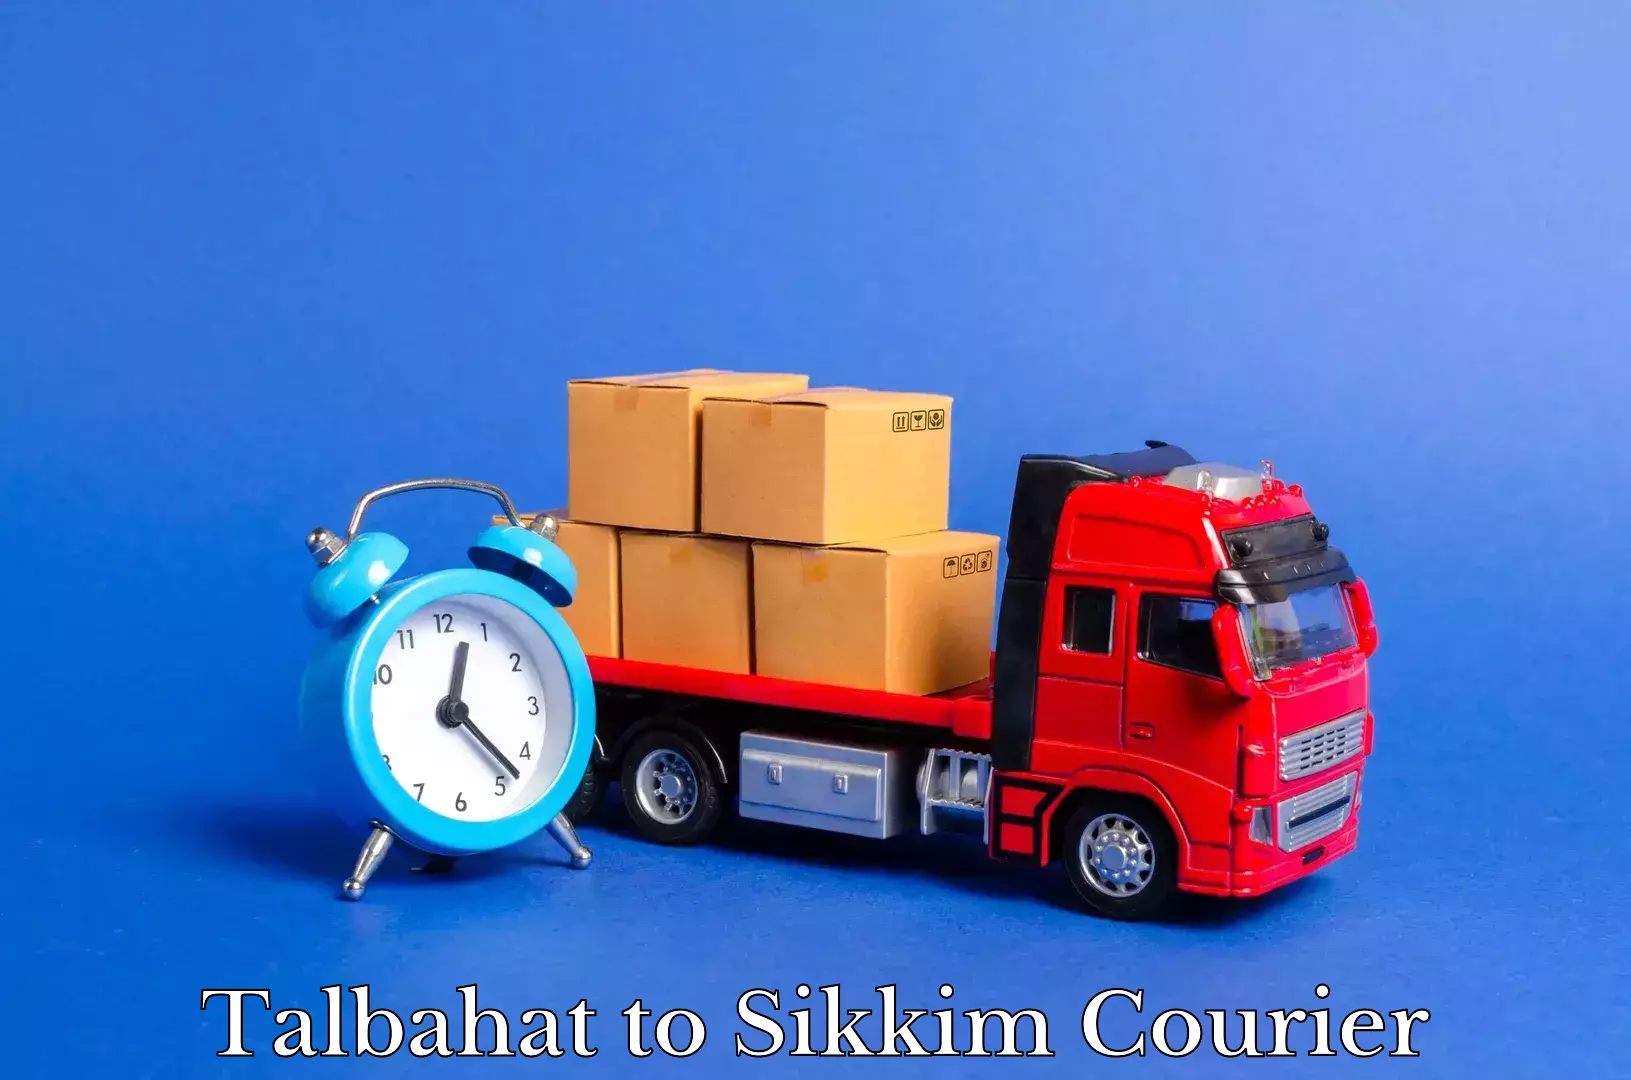 Efficient relocation services Talbahat to Sikkim